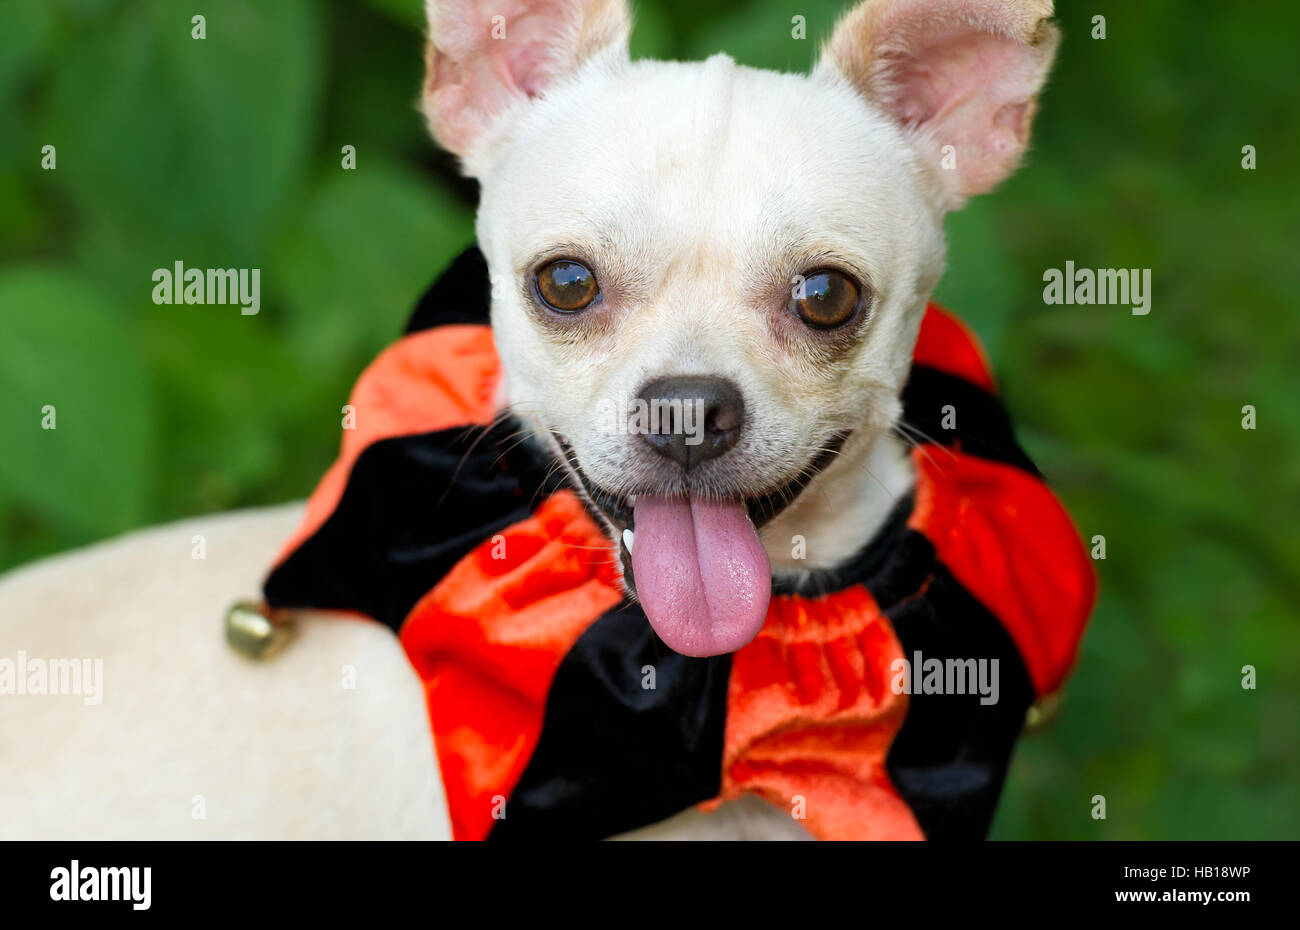 Dog funny is a cute excited dog with his tongue hanging out of his mouth and a great big smile on his face. Stock Photo